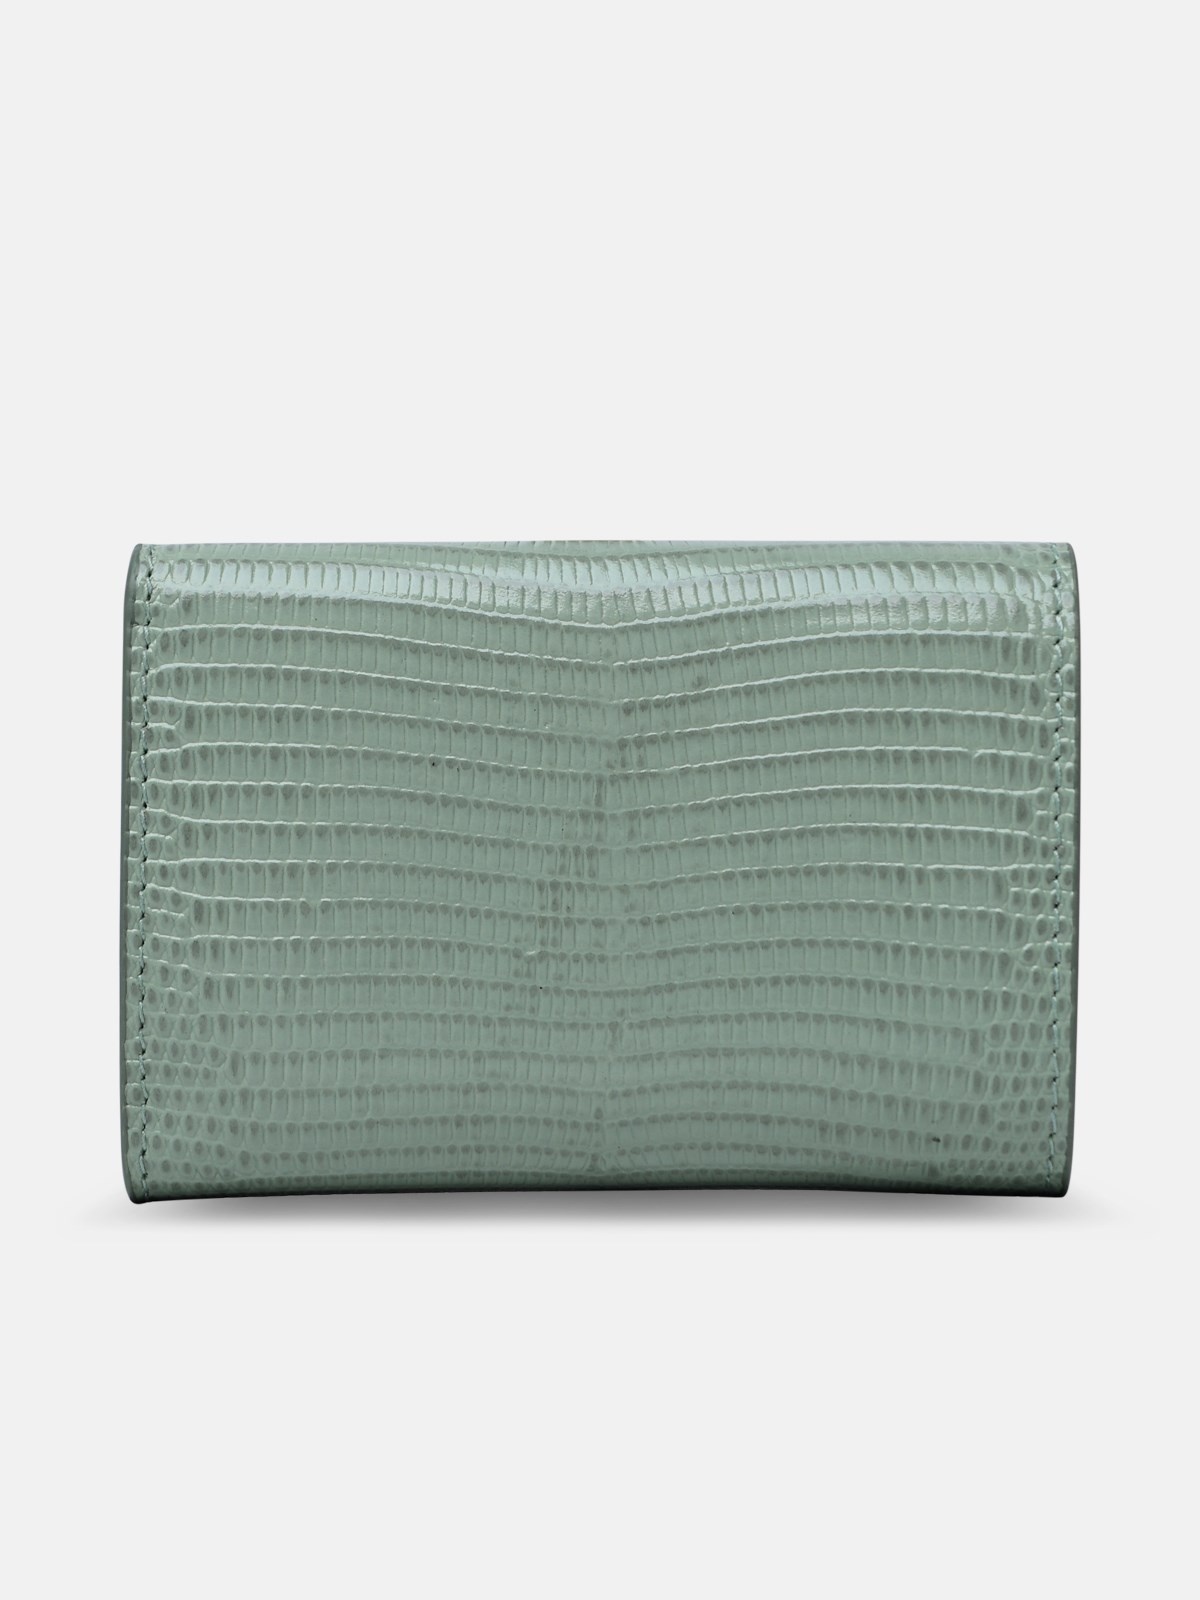 PASTEL GREEN CALF LEATHER WALLET - 3